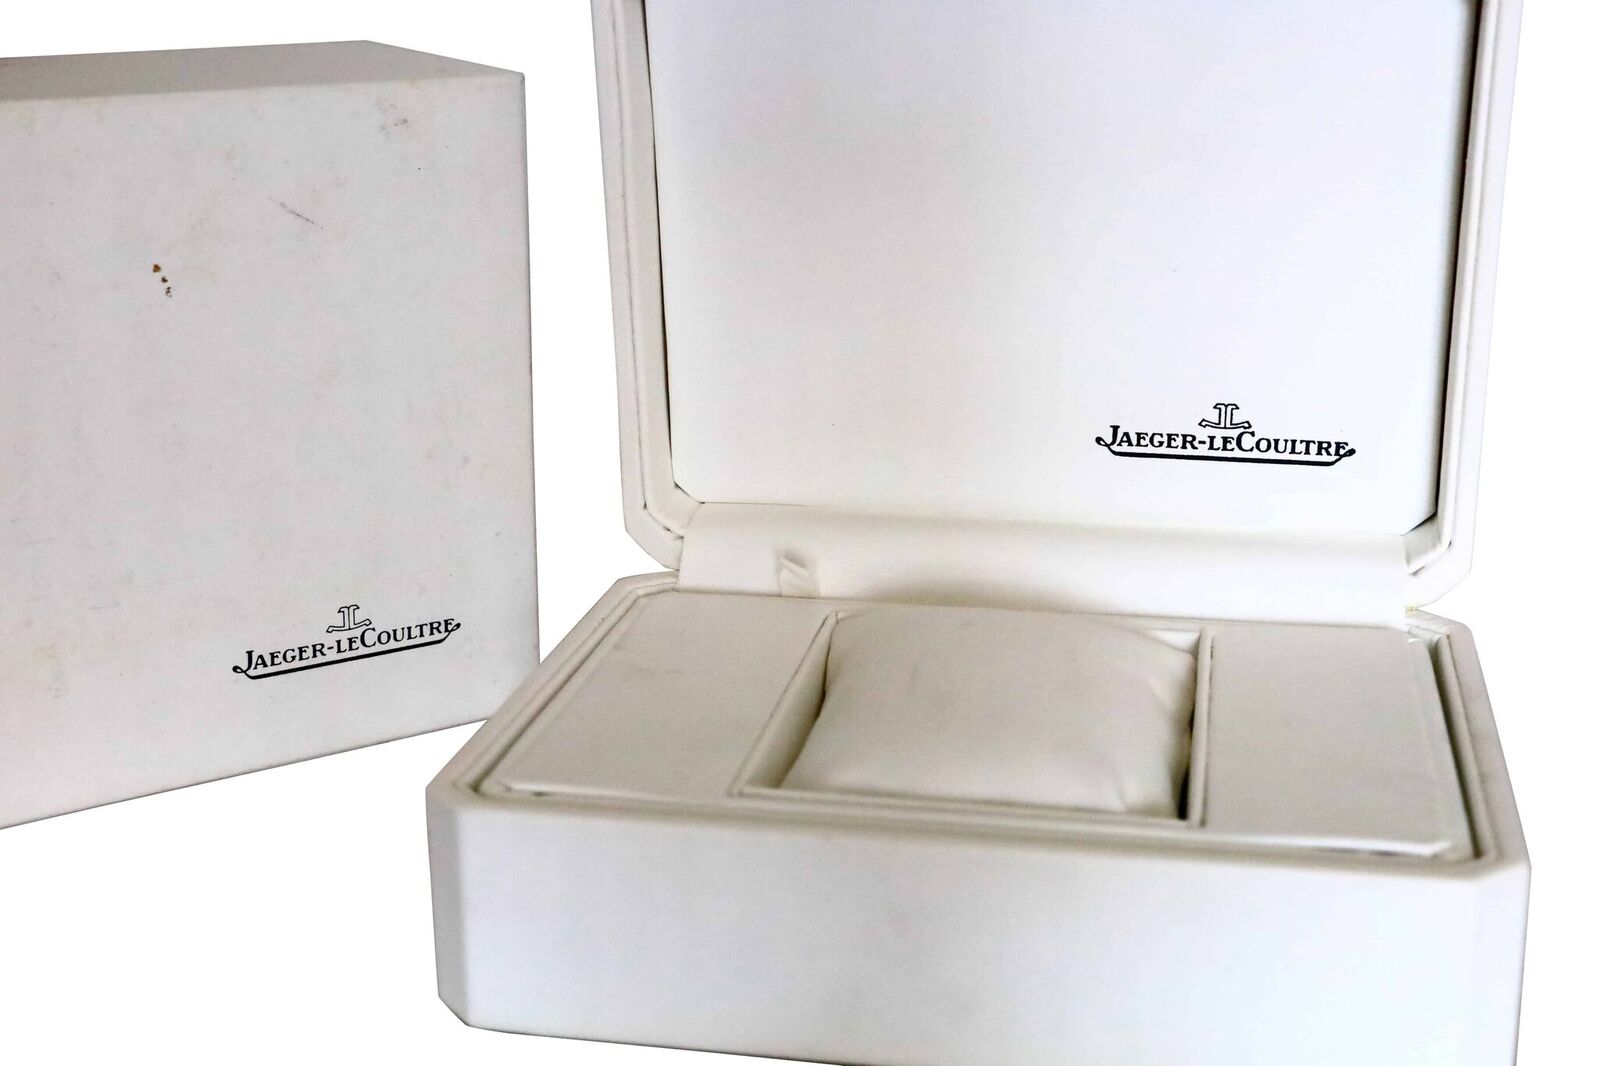 Jaeger LeCoultre Watch Box - Rare Watch Parts